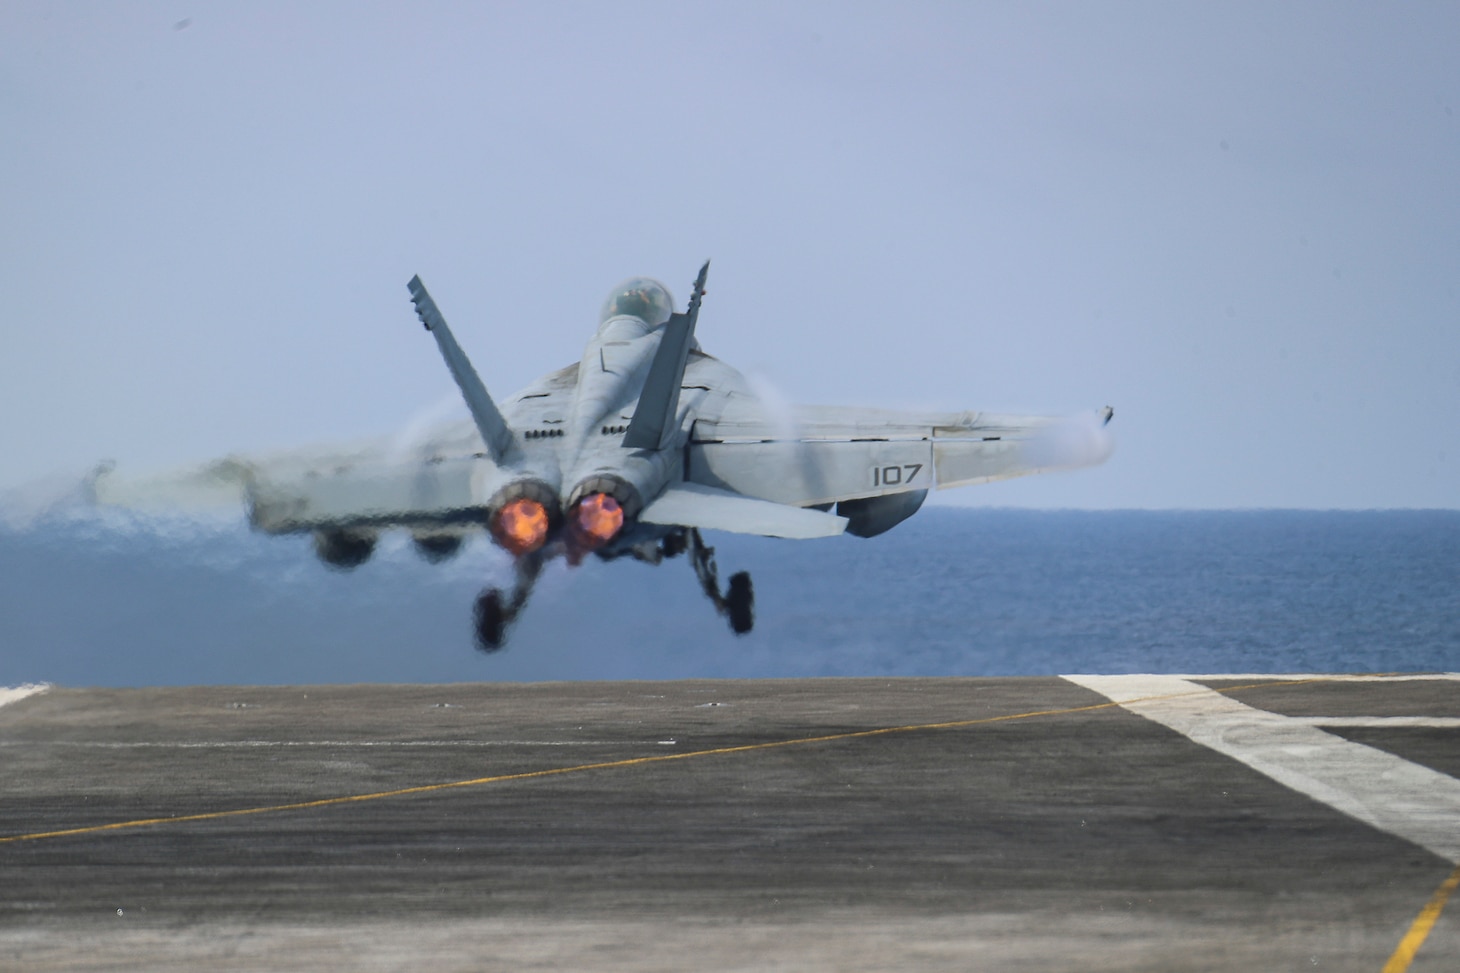 PHILIPPINE SEA (March 15, 2022) An F/A-18F Super Hornet, assigned to the "Black Aces" of Strike Fighter Squadron (VFA) 41, launches from the flight deck of the Nimitz-class aircraft carrier USS Abraham Lincoln (CVN 72). Abraham Lincoln Strike Group is on a scheduled deployment in the U.S. 7th Fleet area of operations to enhance interoperability through alliances and partnerships while serving as a ready-response force in support of a free and open Indo-Pacific region. (U.S. Navy photo by Mass Communication Specialist 3rd Class Javier Reyes)